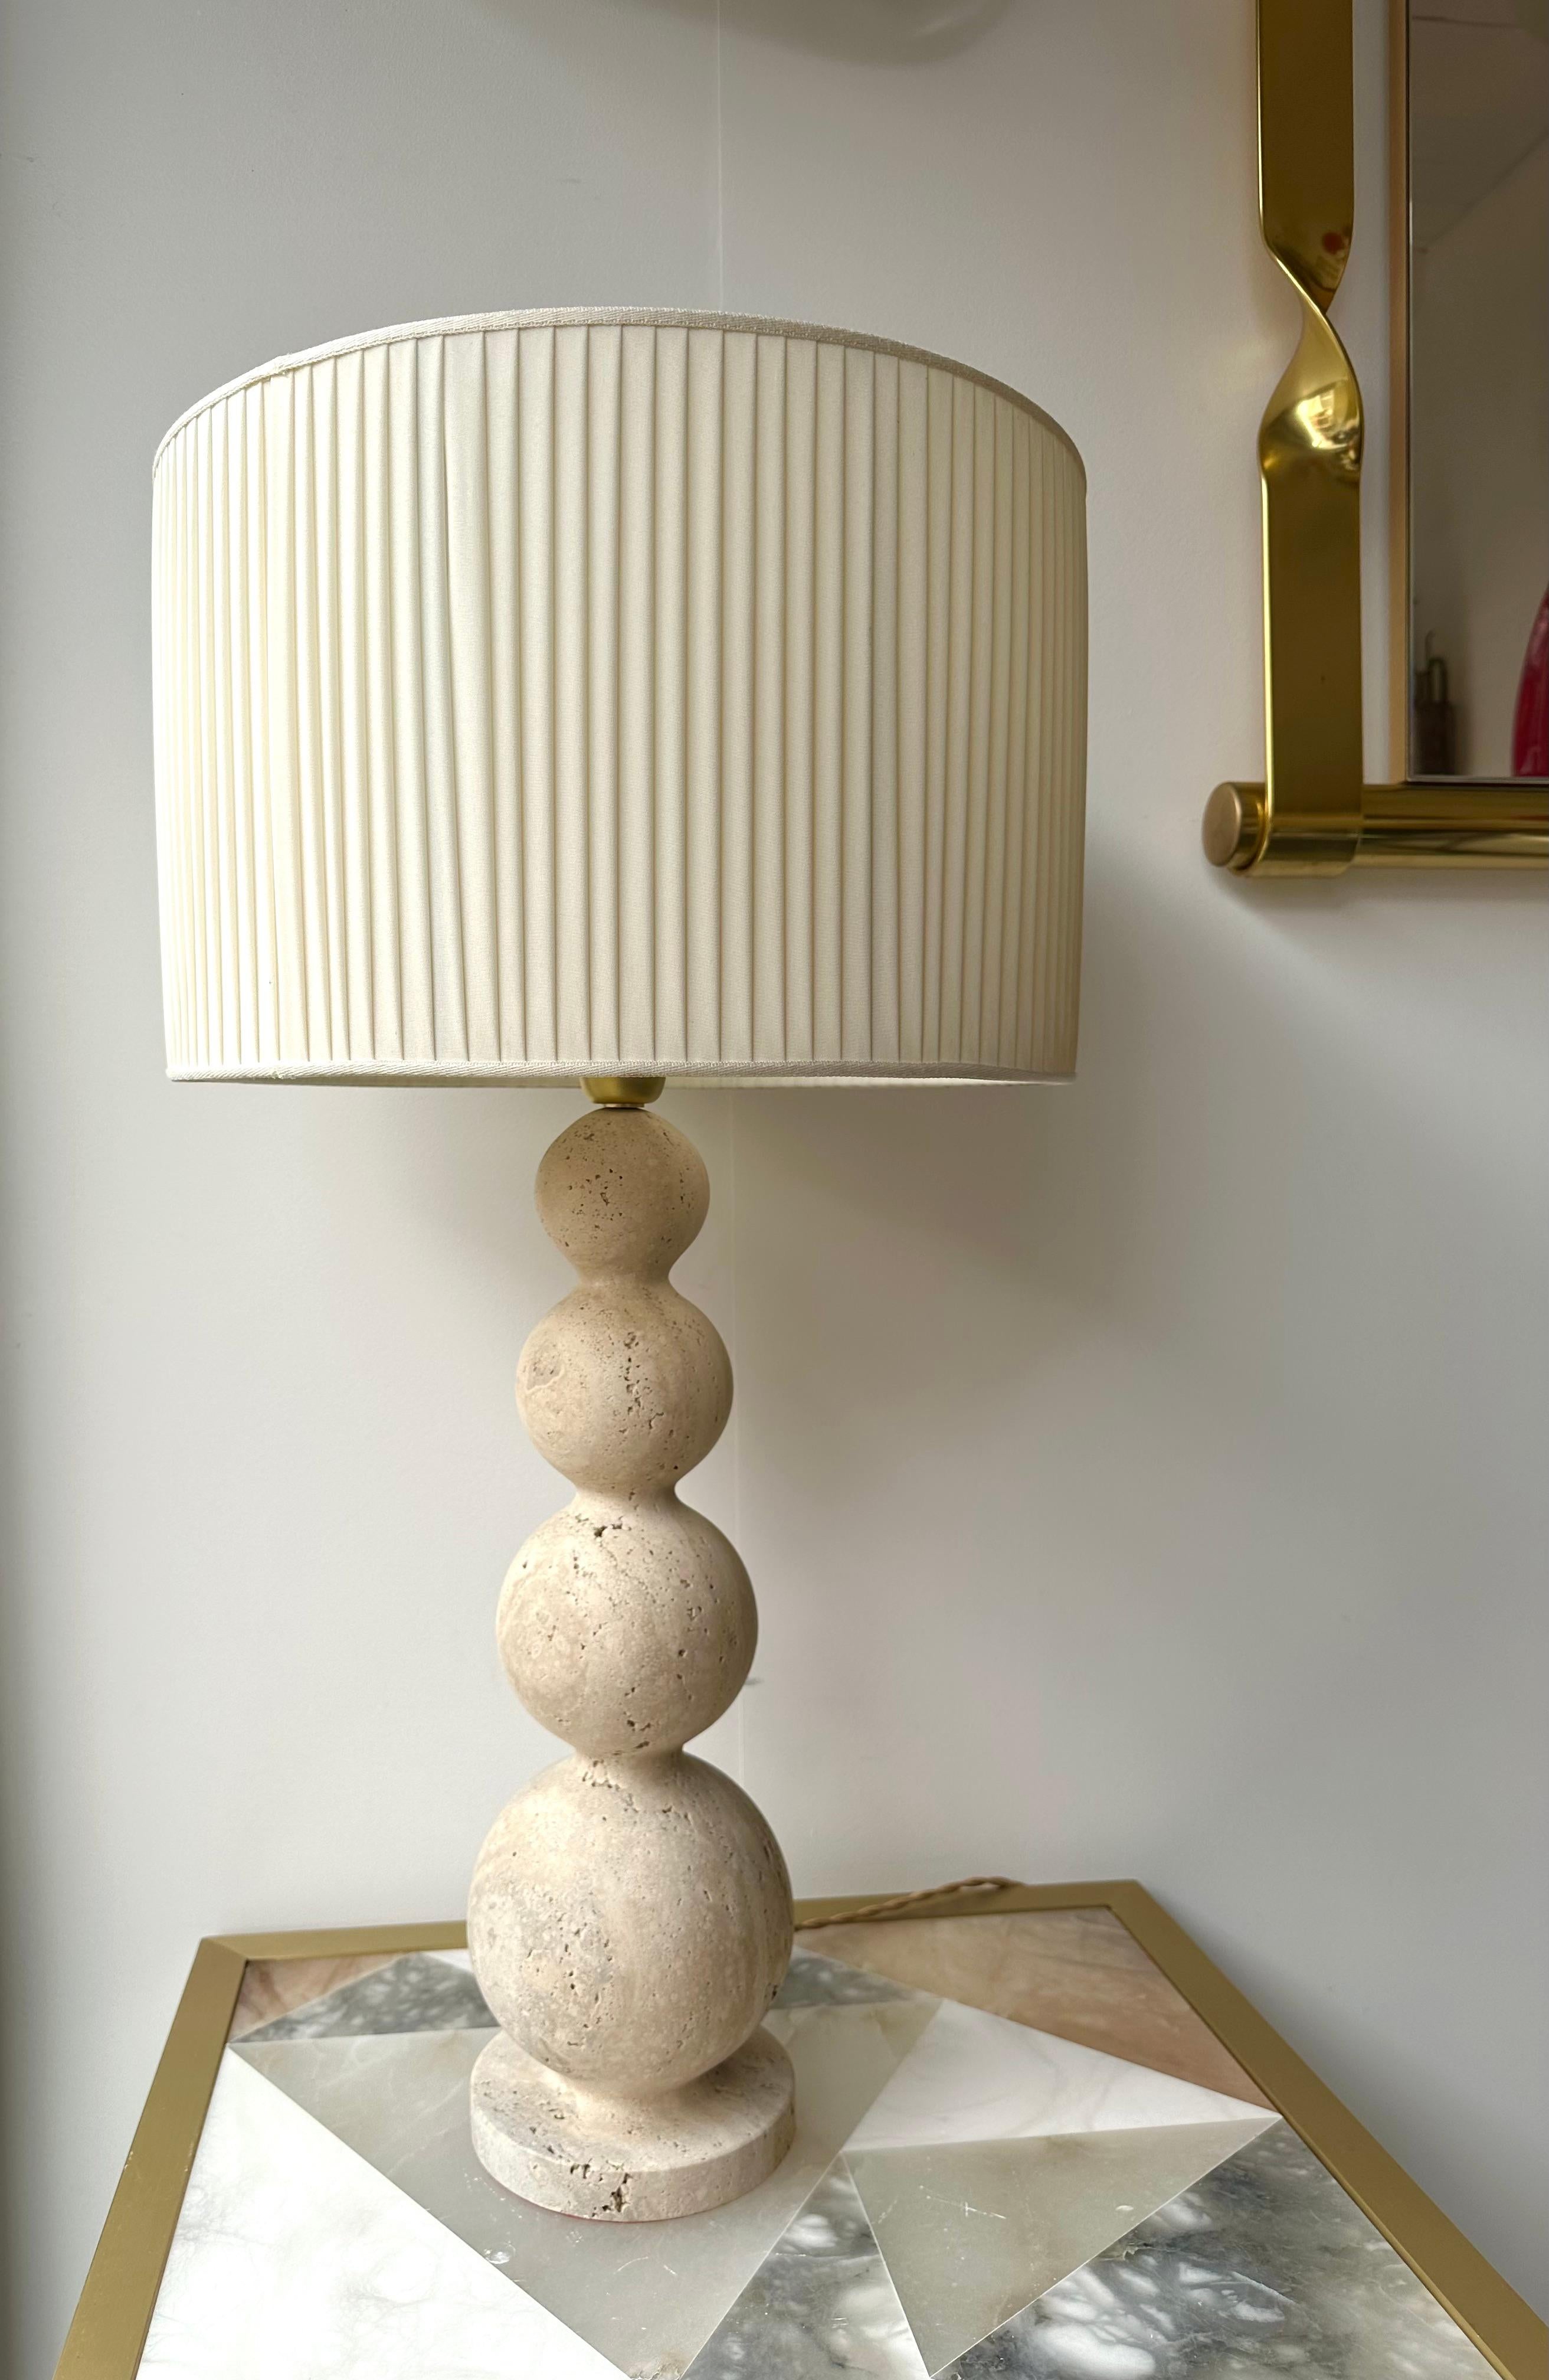 Mid-Century Modern Hollywood Regency style pair of Ball travertine stone a variant of marble table or bedside lamps. Cut in one piece block or travertine. Brass elements.

Measurements indicated with demo shades
Demo shades are not